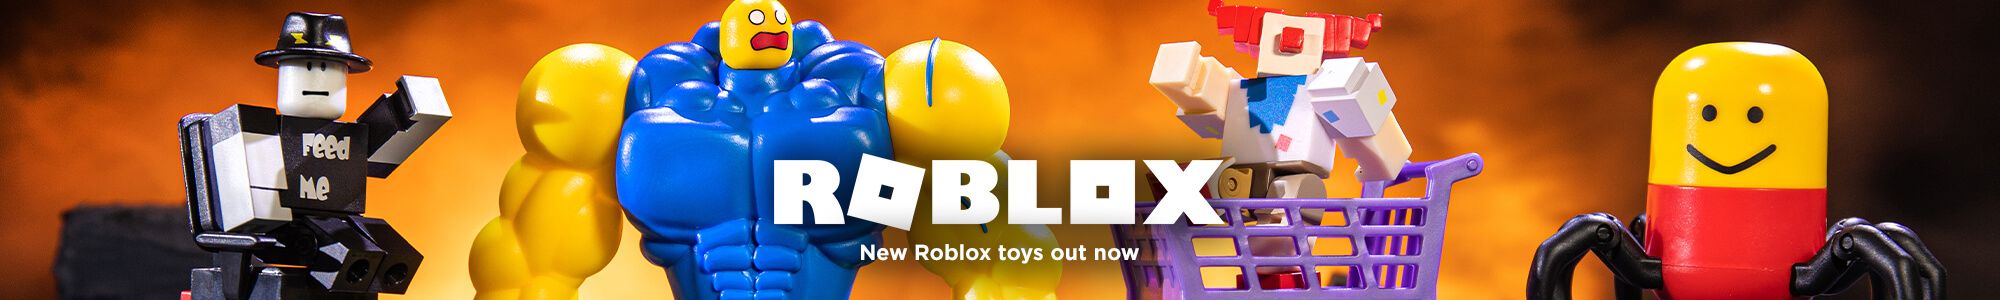 Roblox Roblox Toys Figures The Entertainer - a pirates tale roblox game